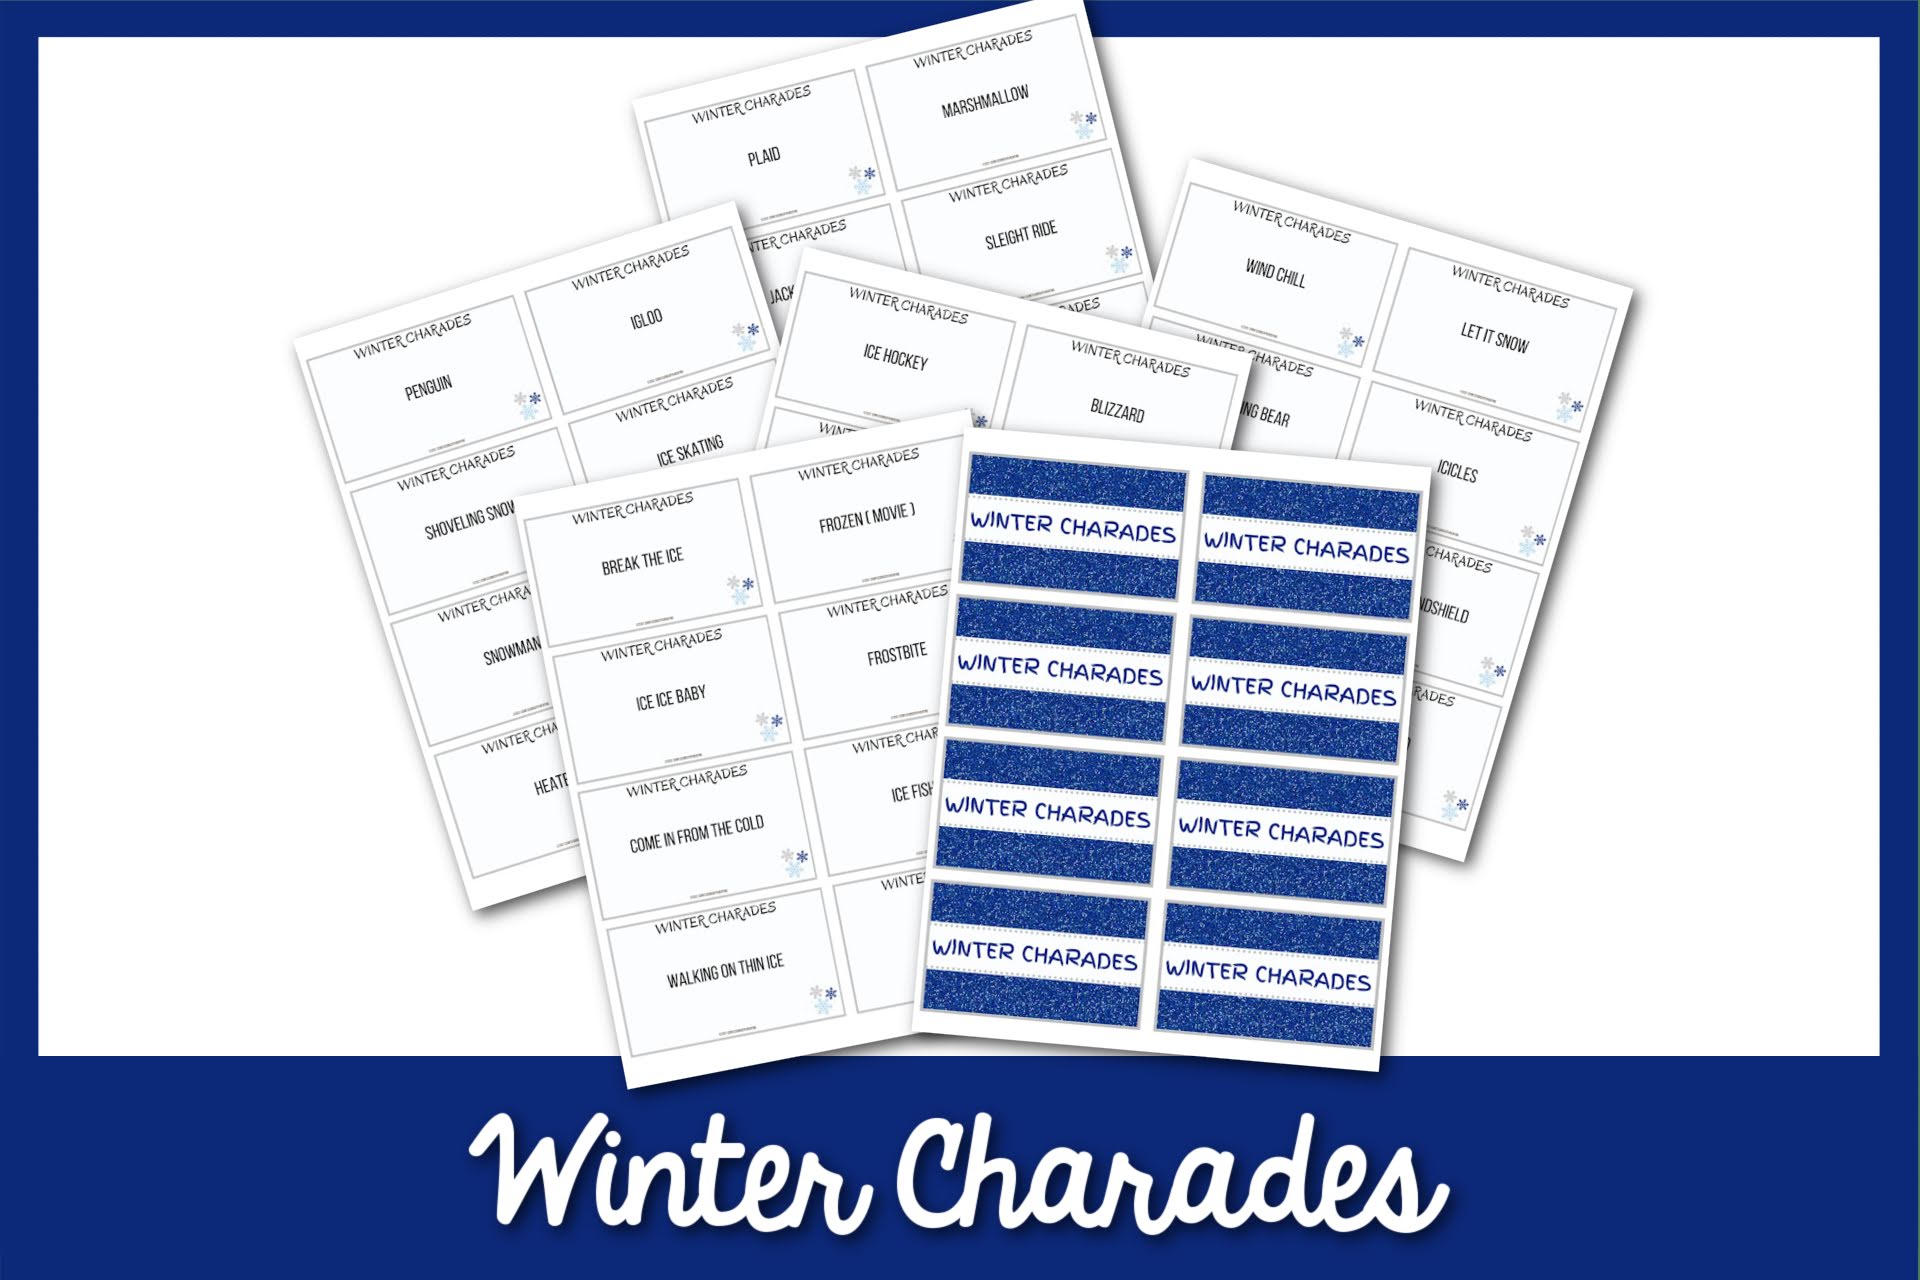 feature image: winter charades on a blue background